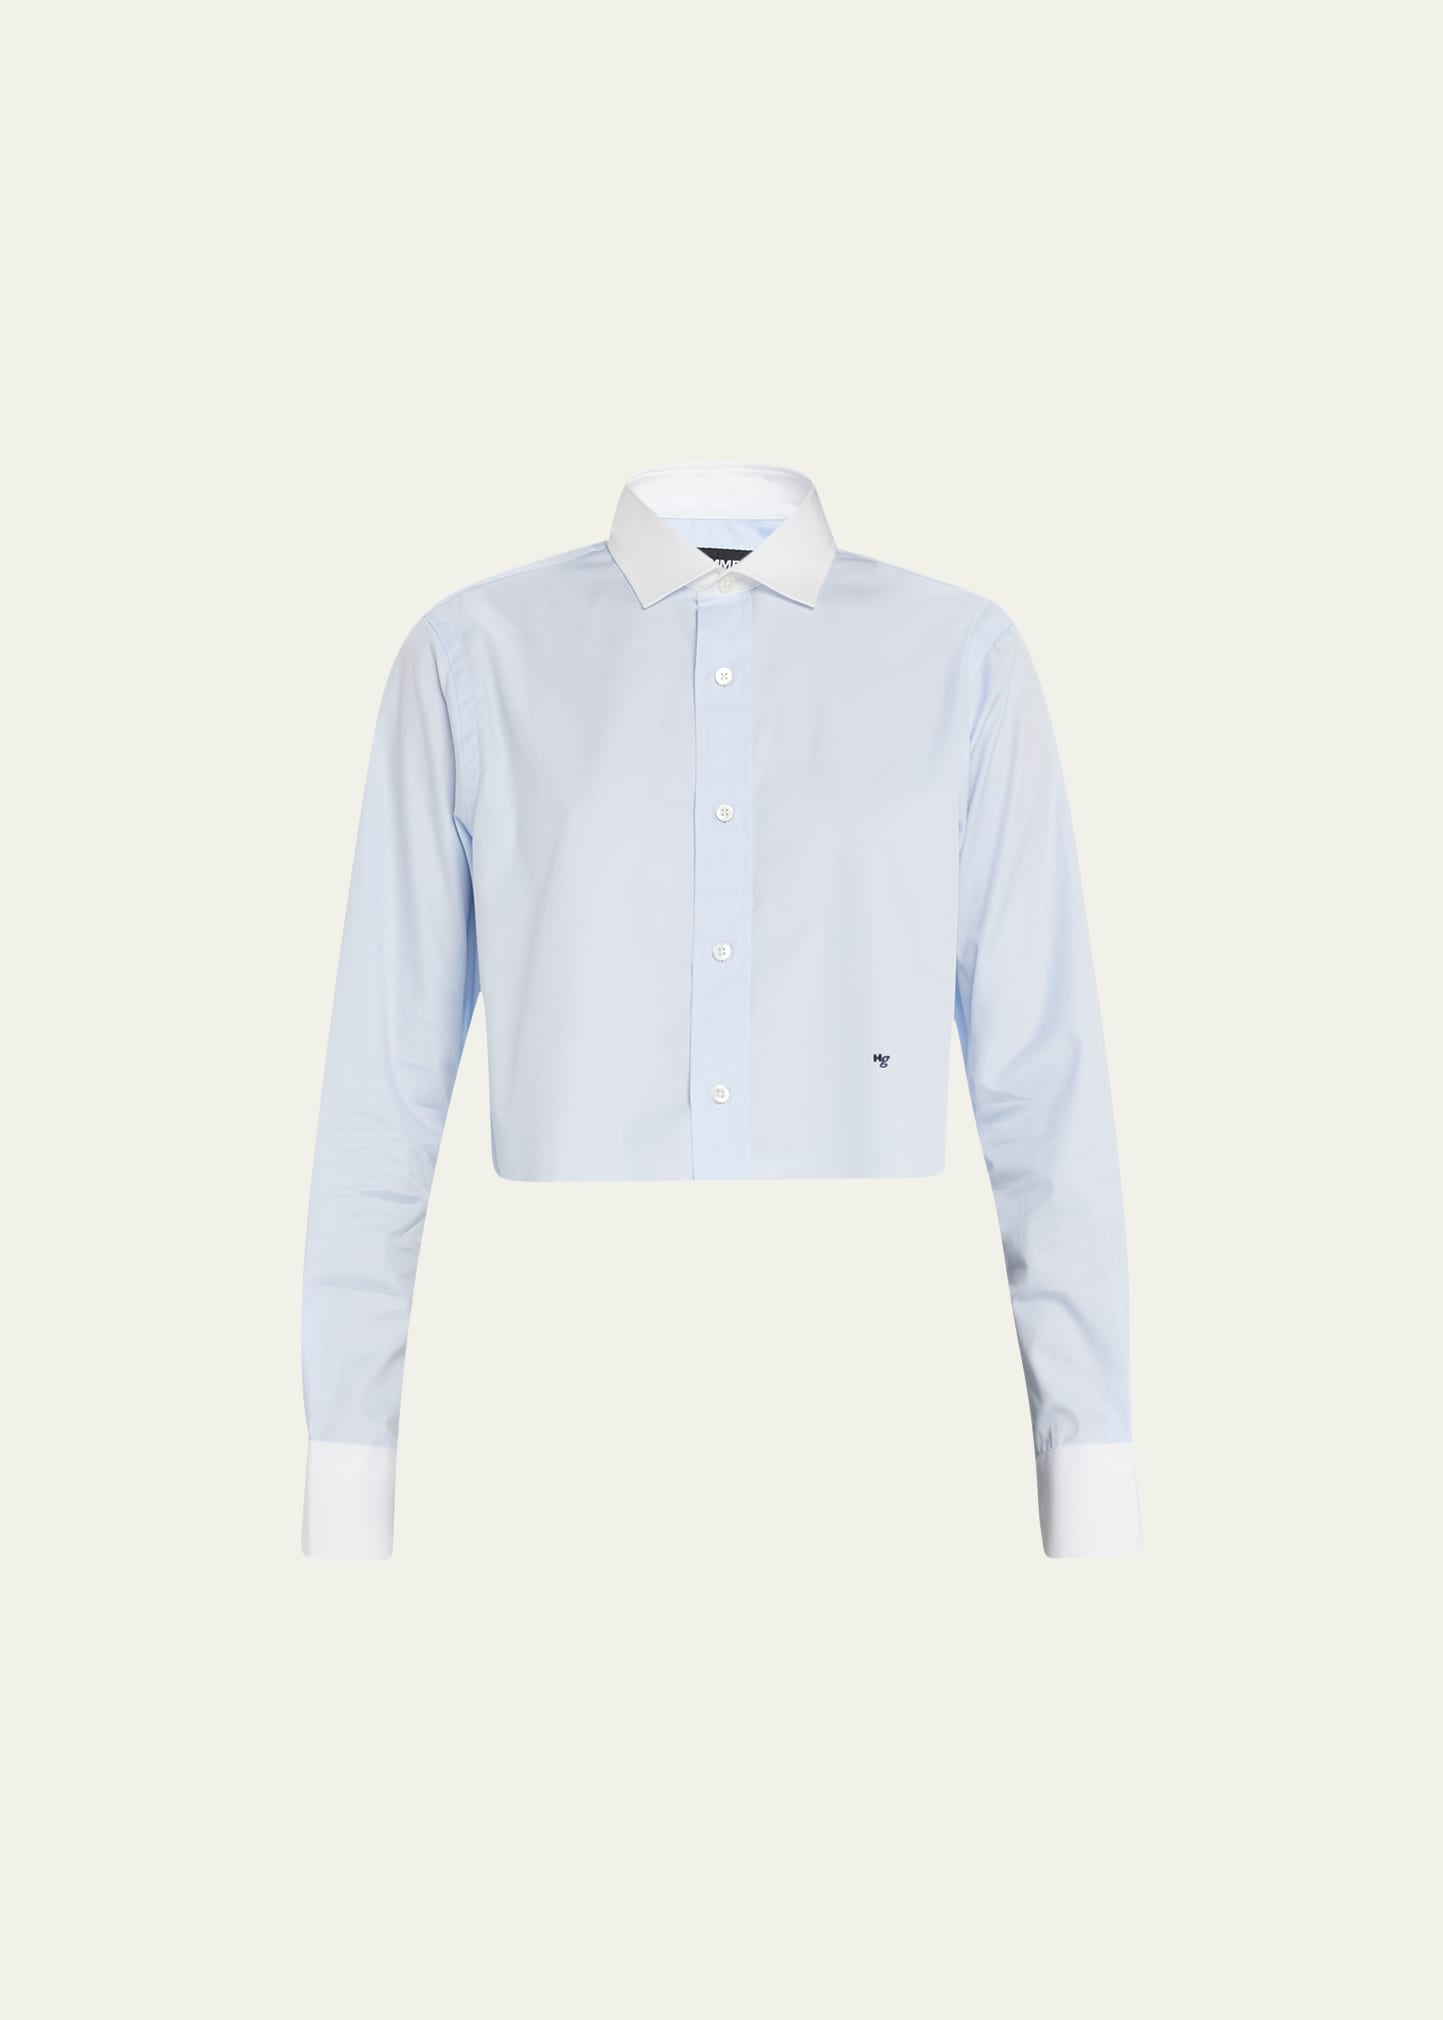 HOMMEGIRLS Cropped Shirt with Contrast Collar